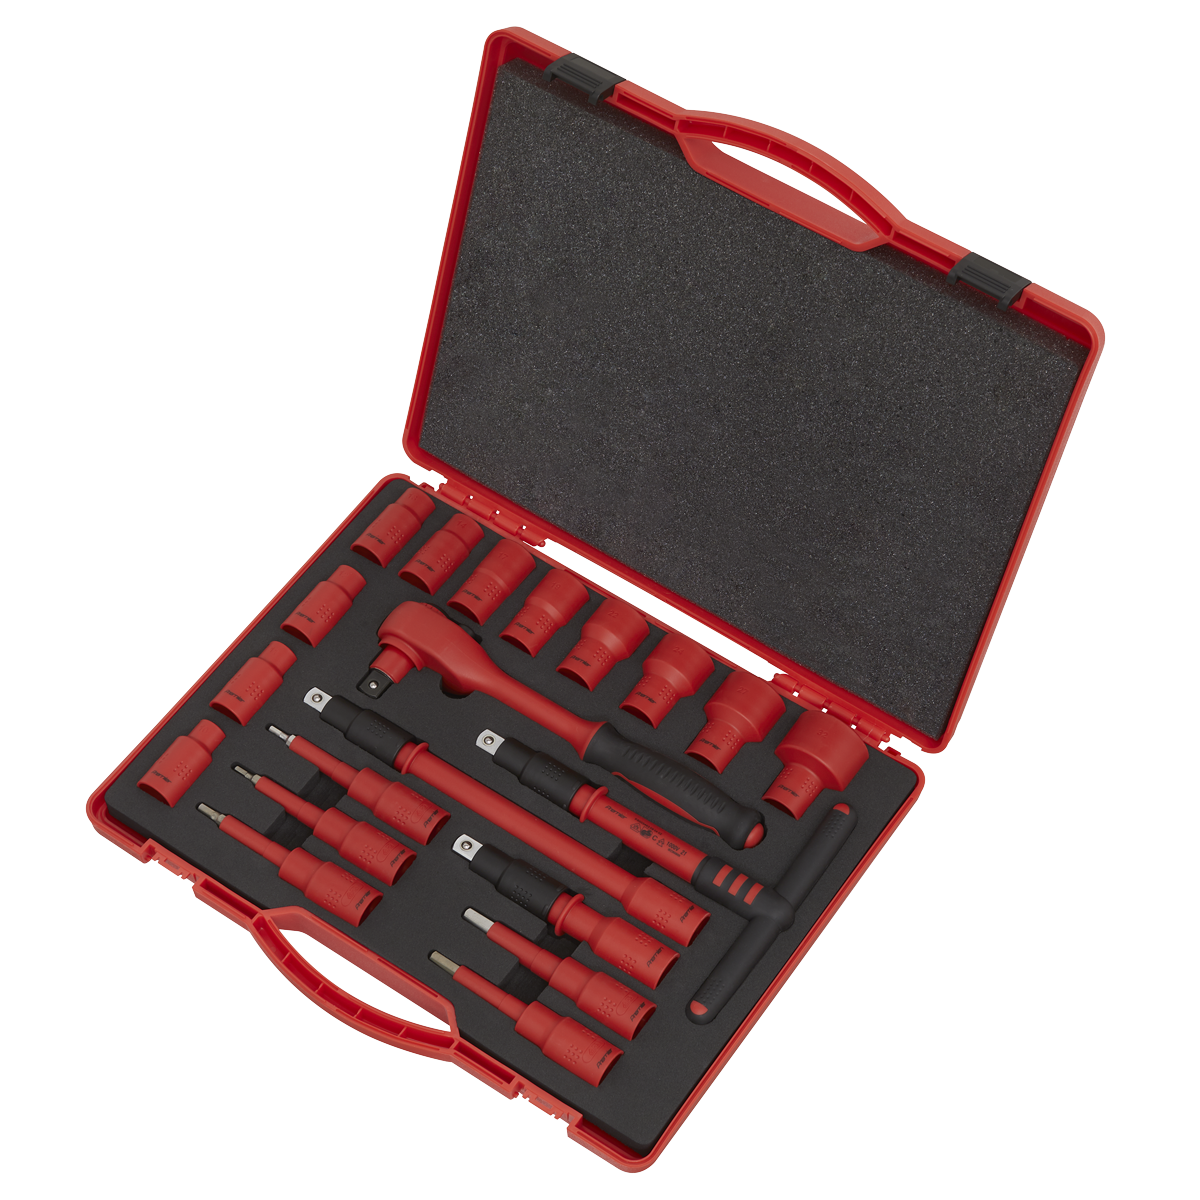 Insulated Socket Set 20pc 1/2"Sq Drive WallDrive® VDE Approved - AK7941 - Farming Parts